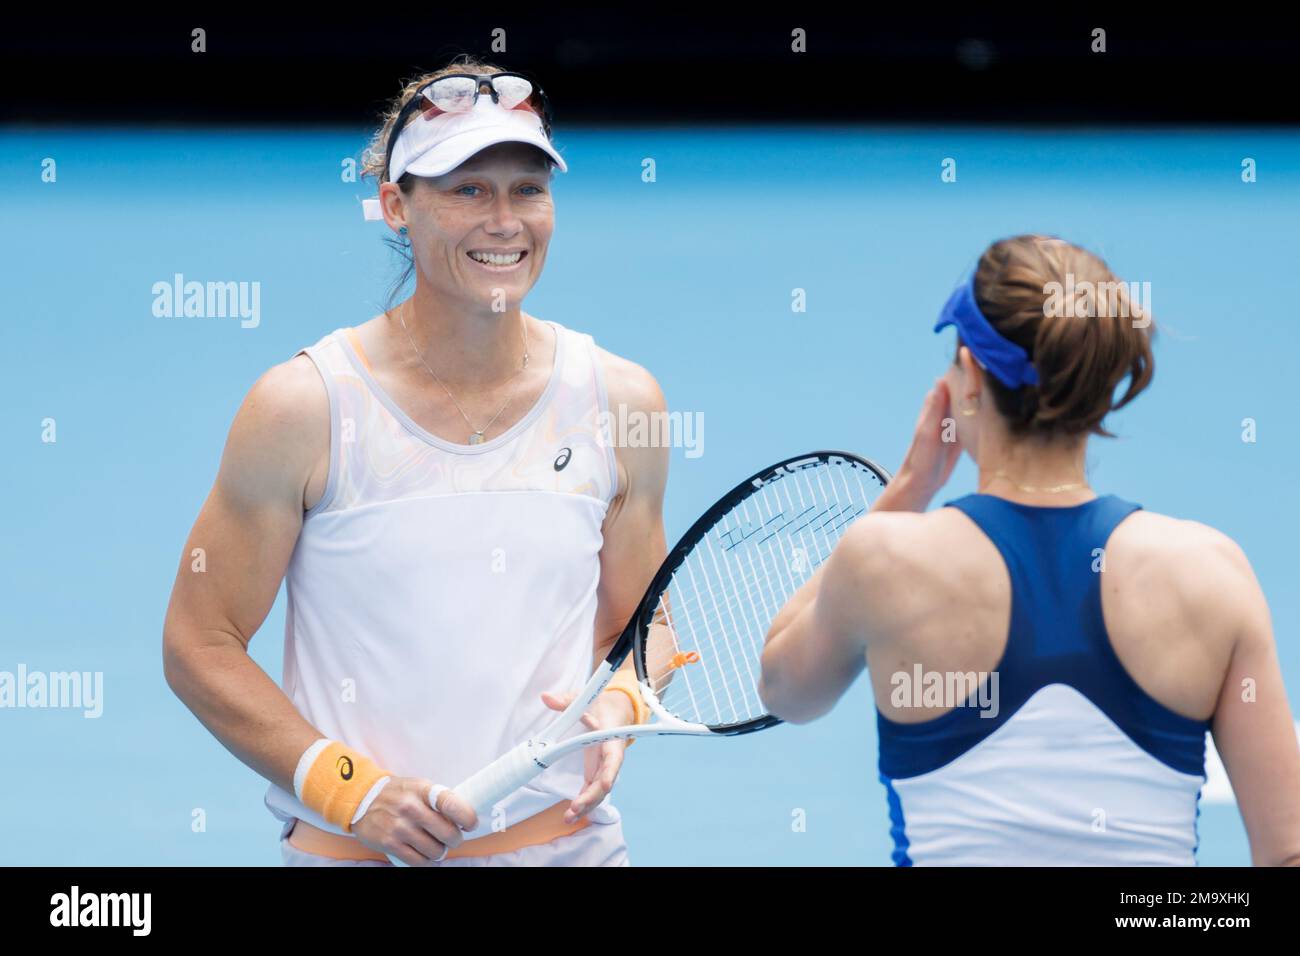 Melbourne, Australia. 19th Jan, 2023. Samantha STOSUR embraces her doubles partner Aiize CORNET of France after losing her match and retires from professional tennis after playing a match against 11th seed Zhaoxuan YANG of China and Hao-Ching CHAN of Taipei in the 1st round Women's Doubles match on day 4 of the 2023 Australian Open on Kia Arena, in Melbourne, Australia. Sydney Low/Cal Sport Media. Credit: csm/Alamy Live News Stock Photo